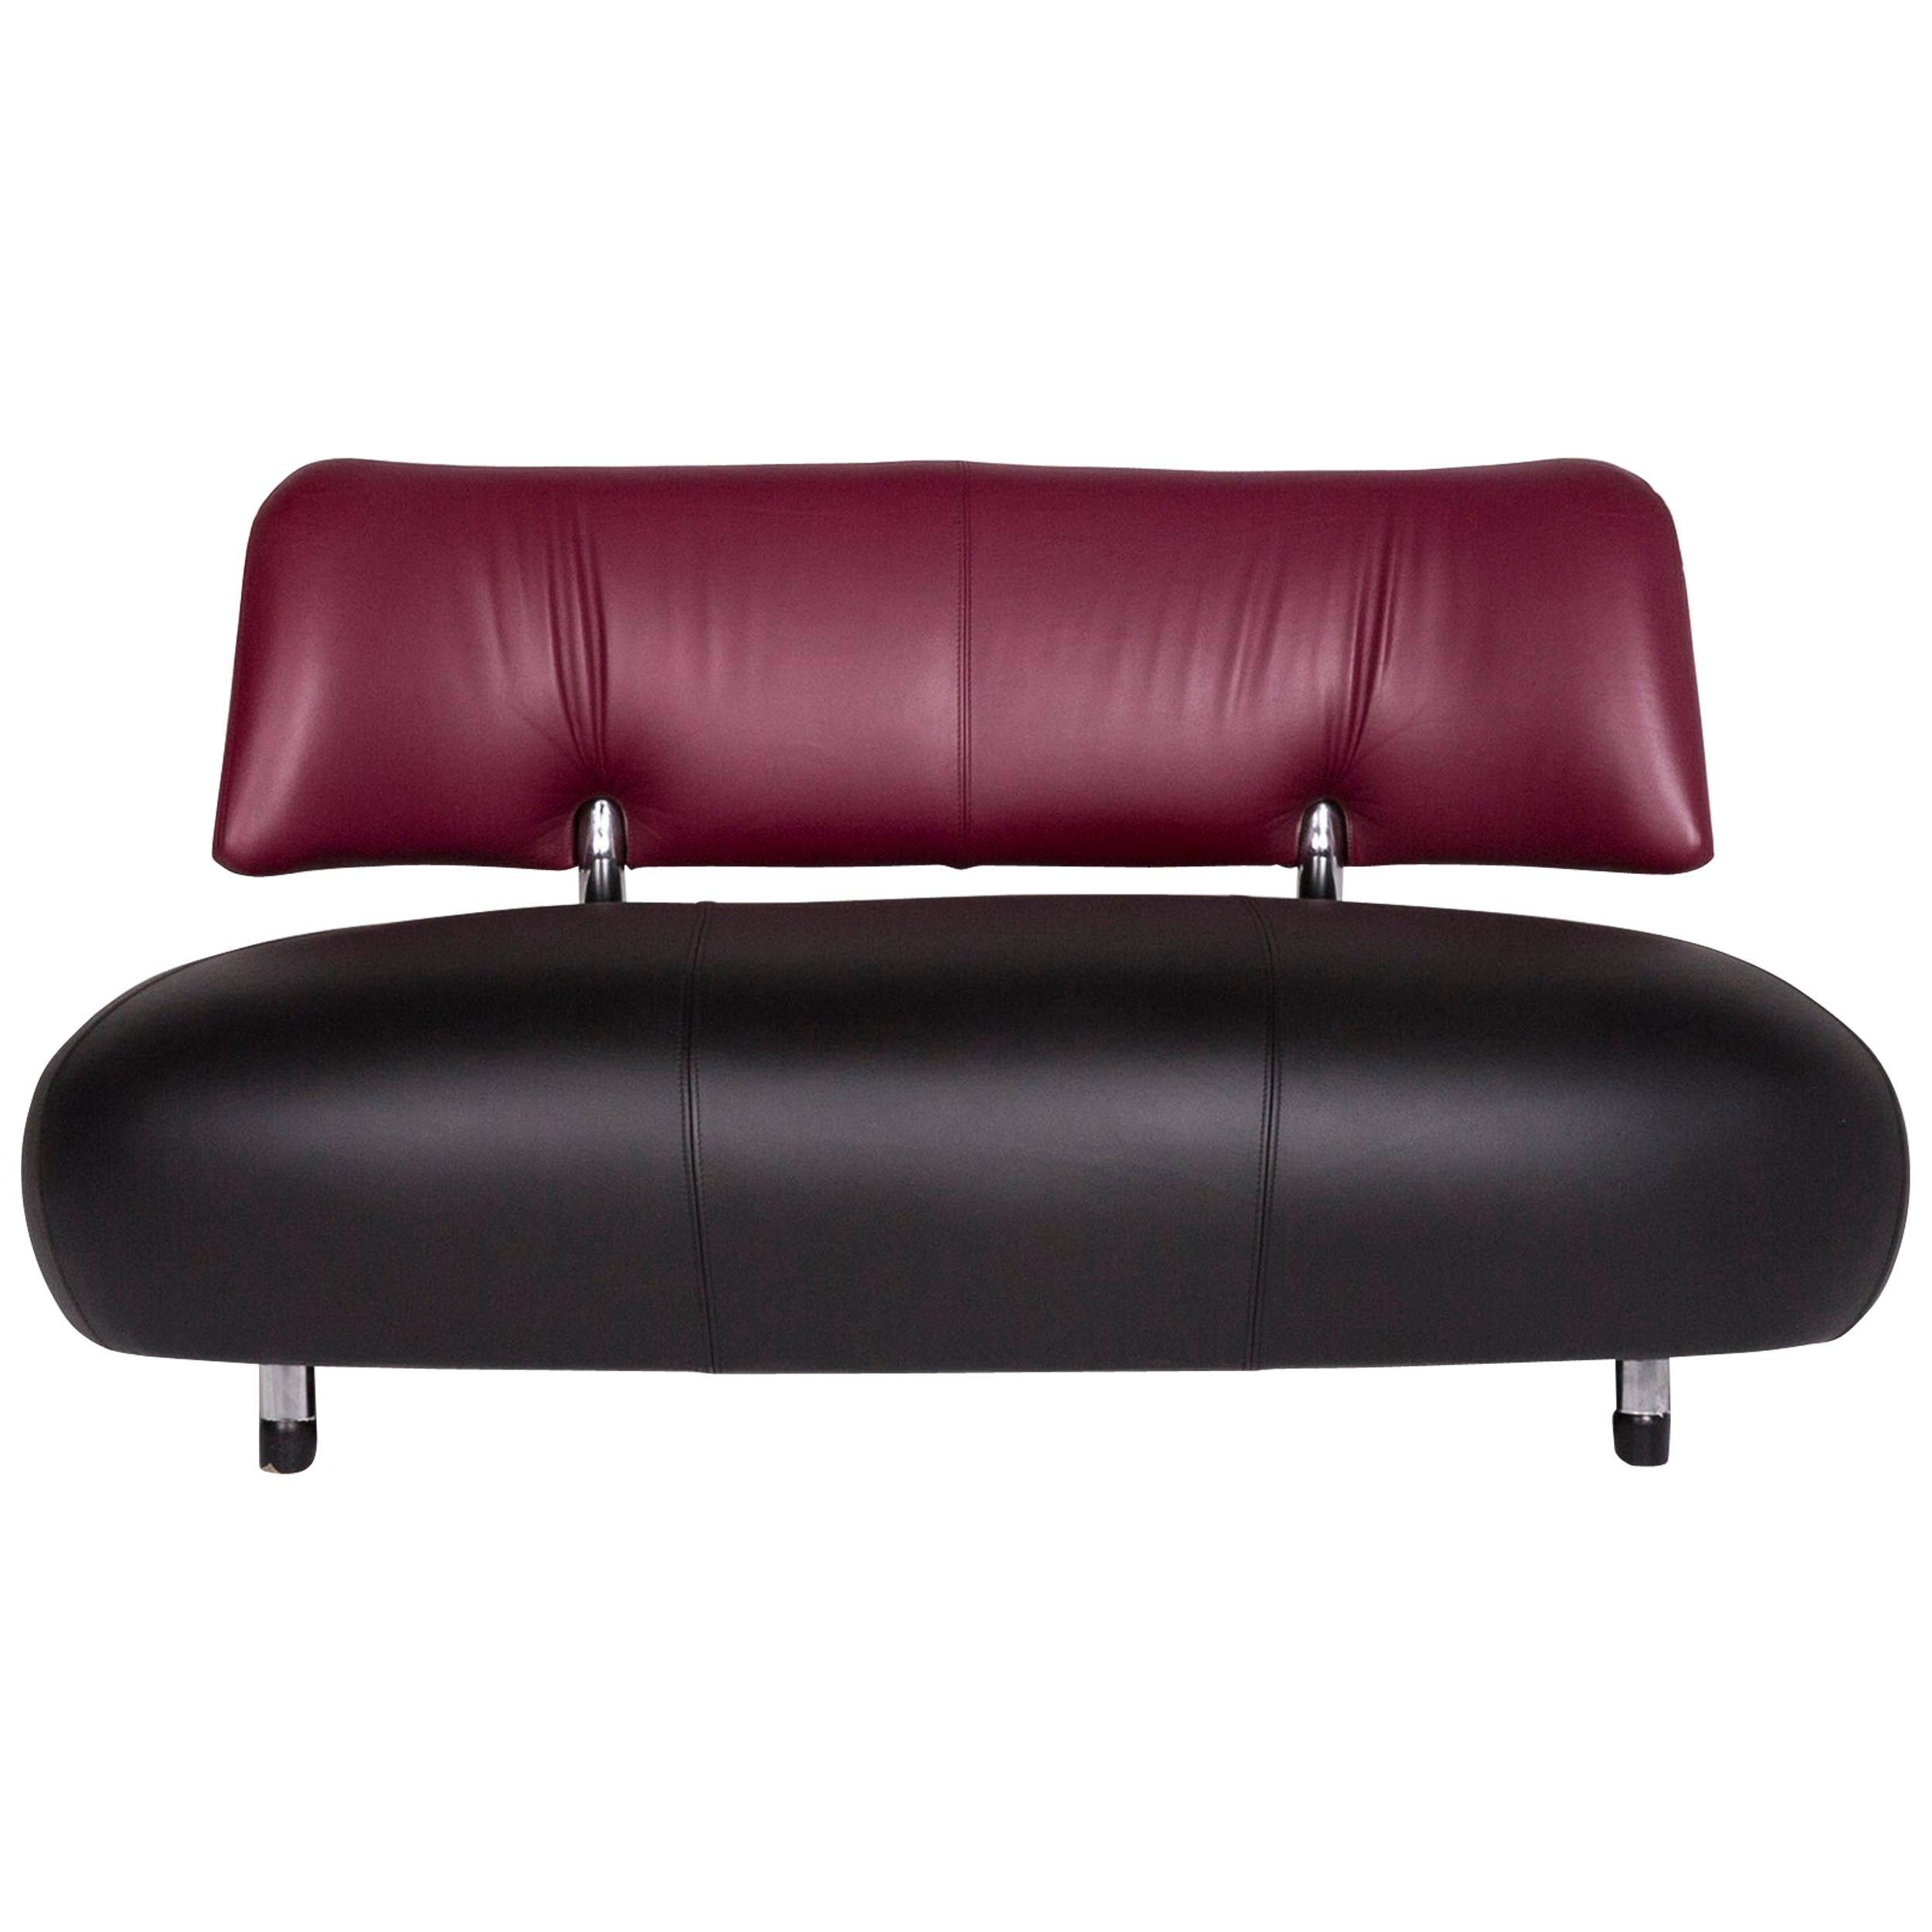 Leolux Pallone Leather Sofa Black Purple Two-Seat Couch For Sale